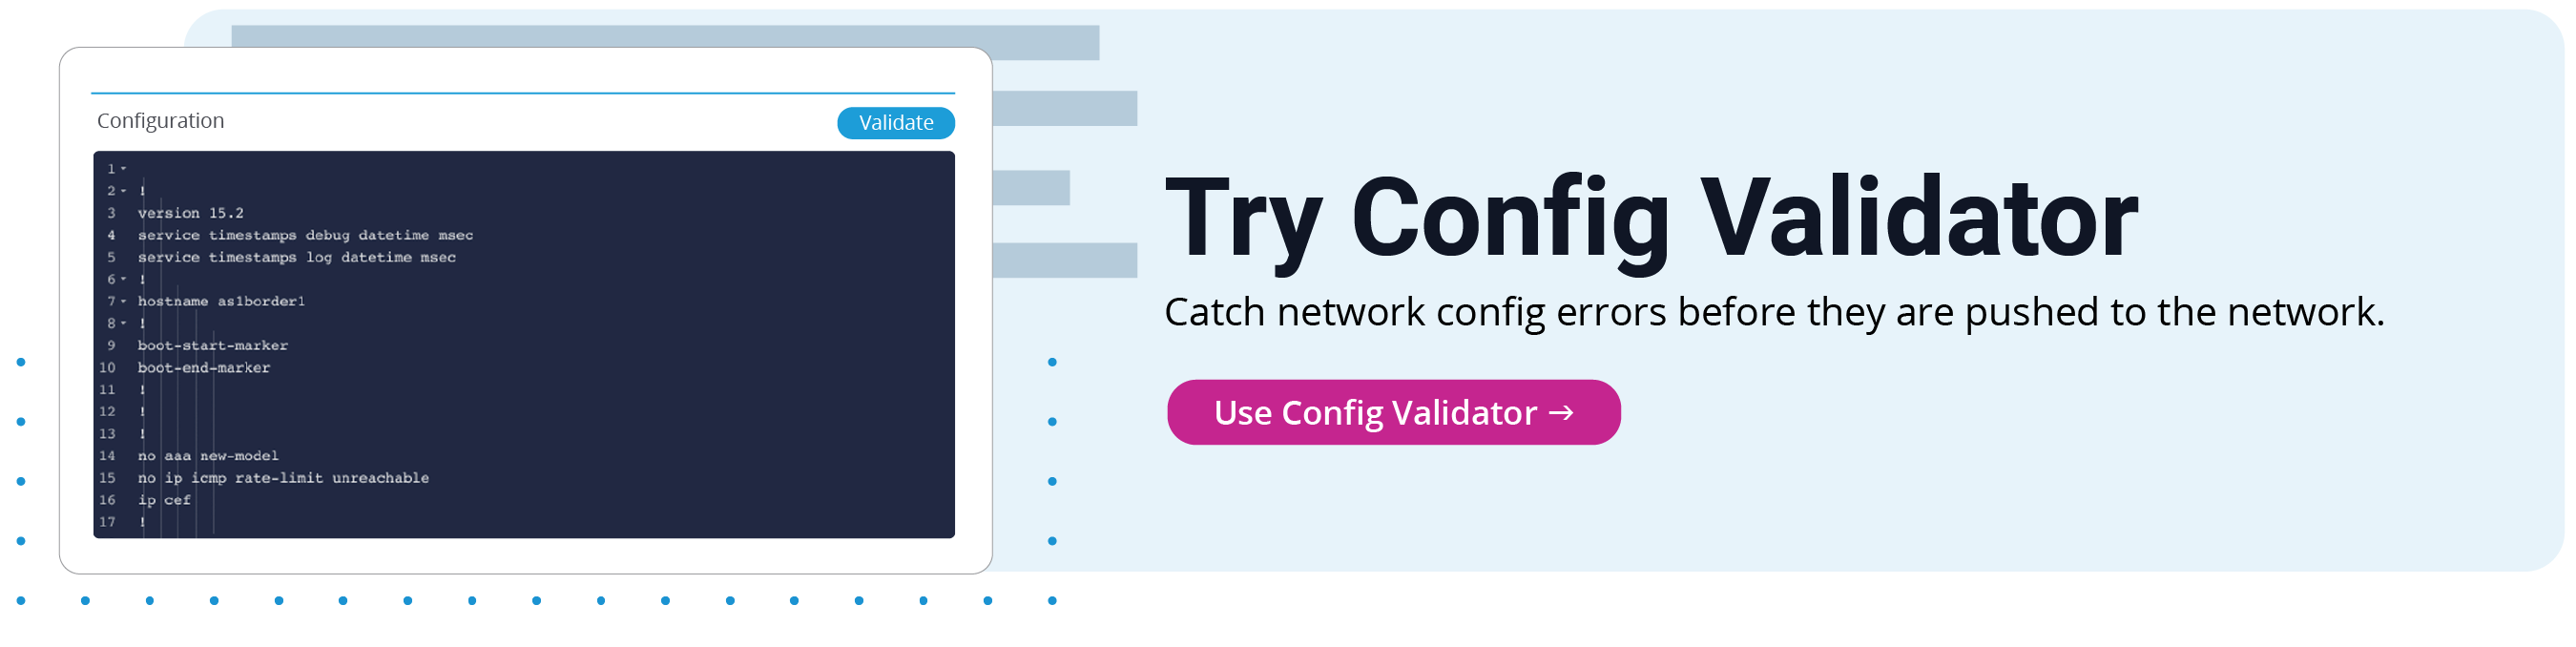 Try Config Validator